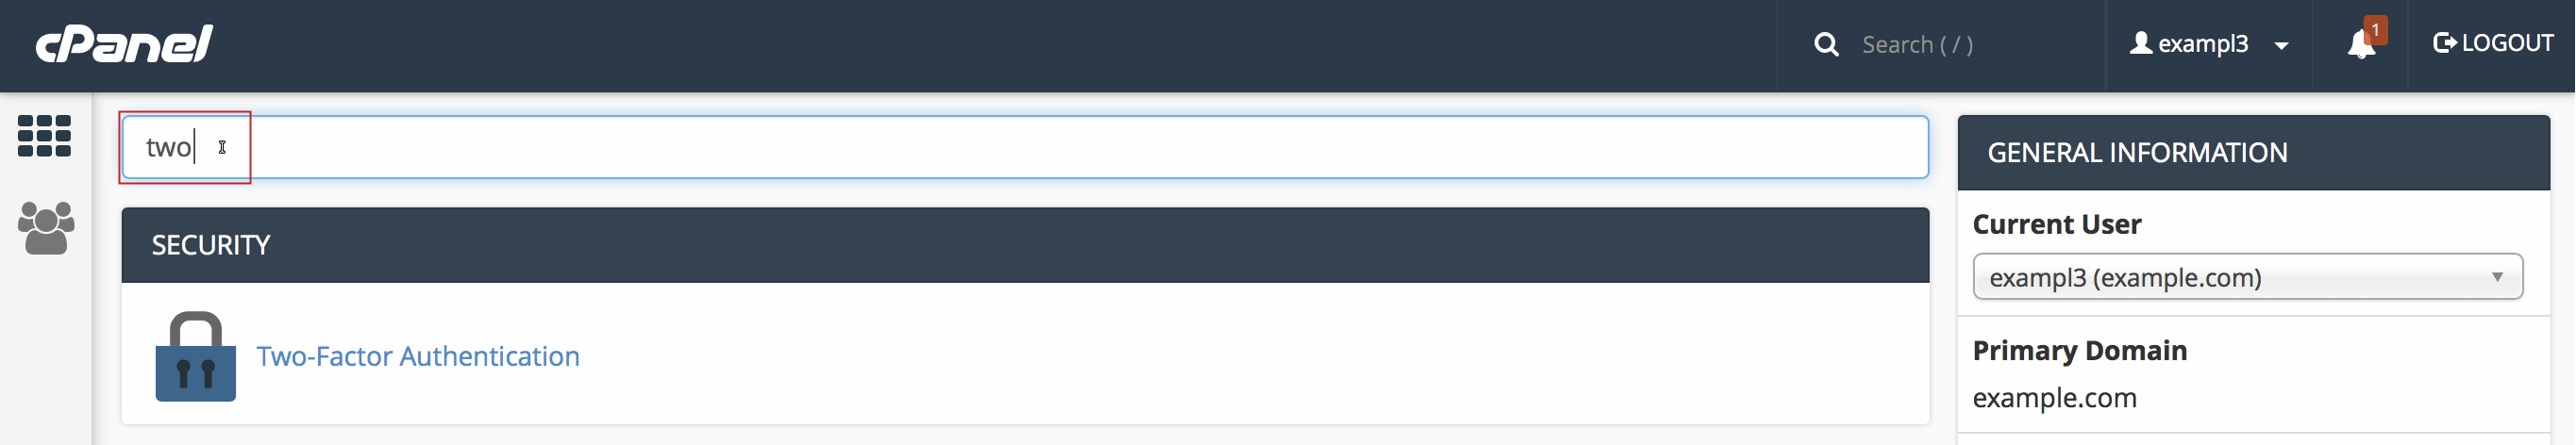 cPanel Search bar with two text entered and highlighted.